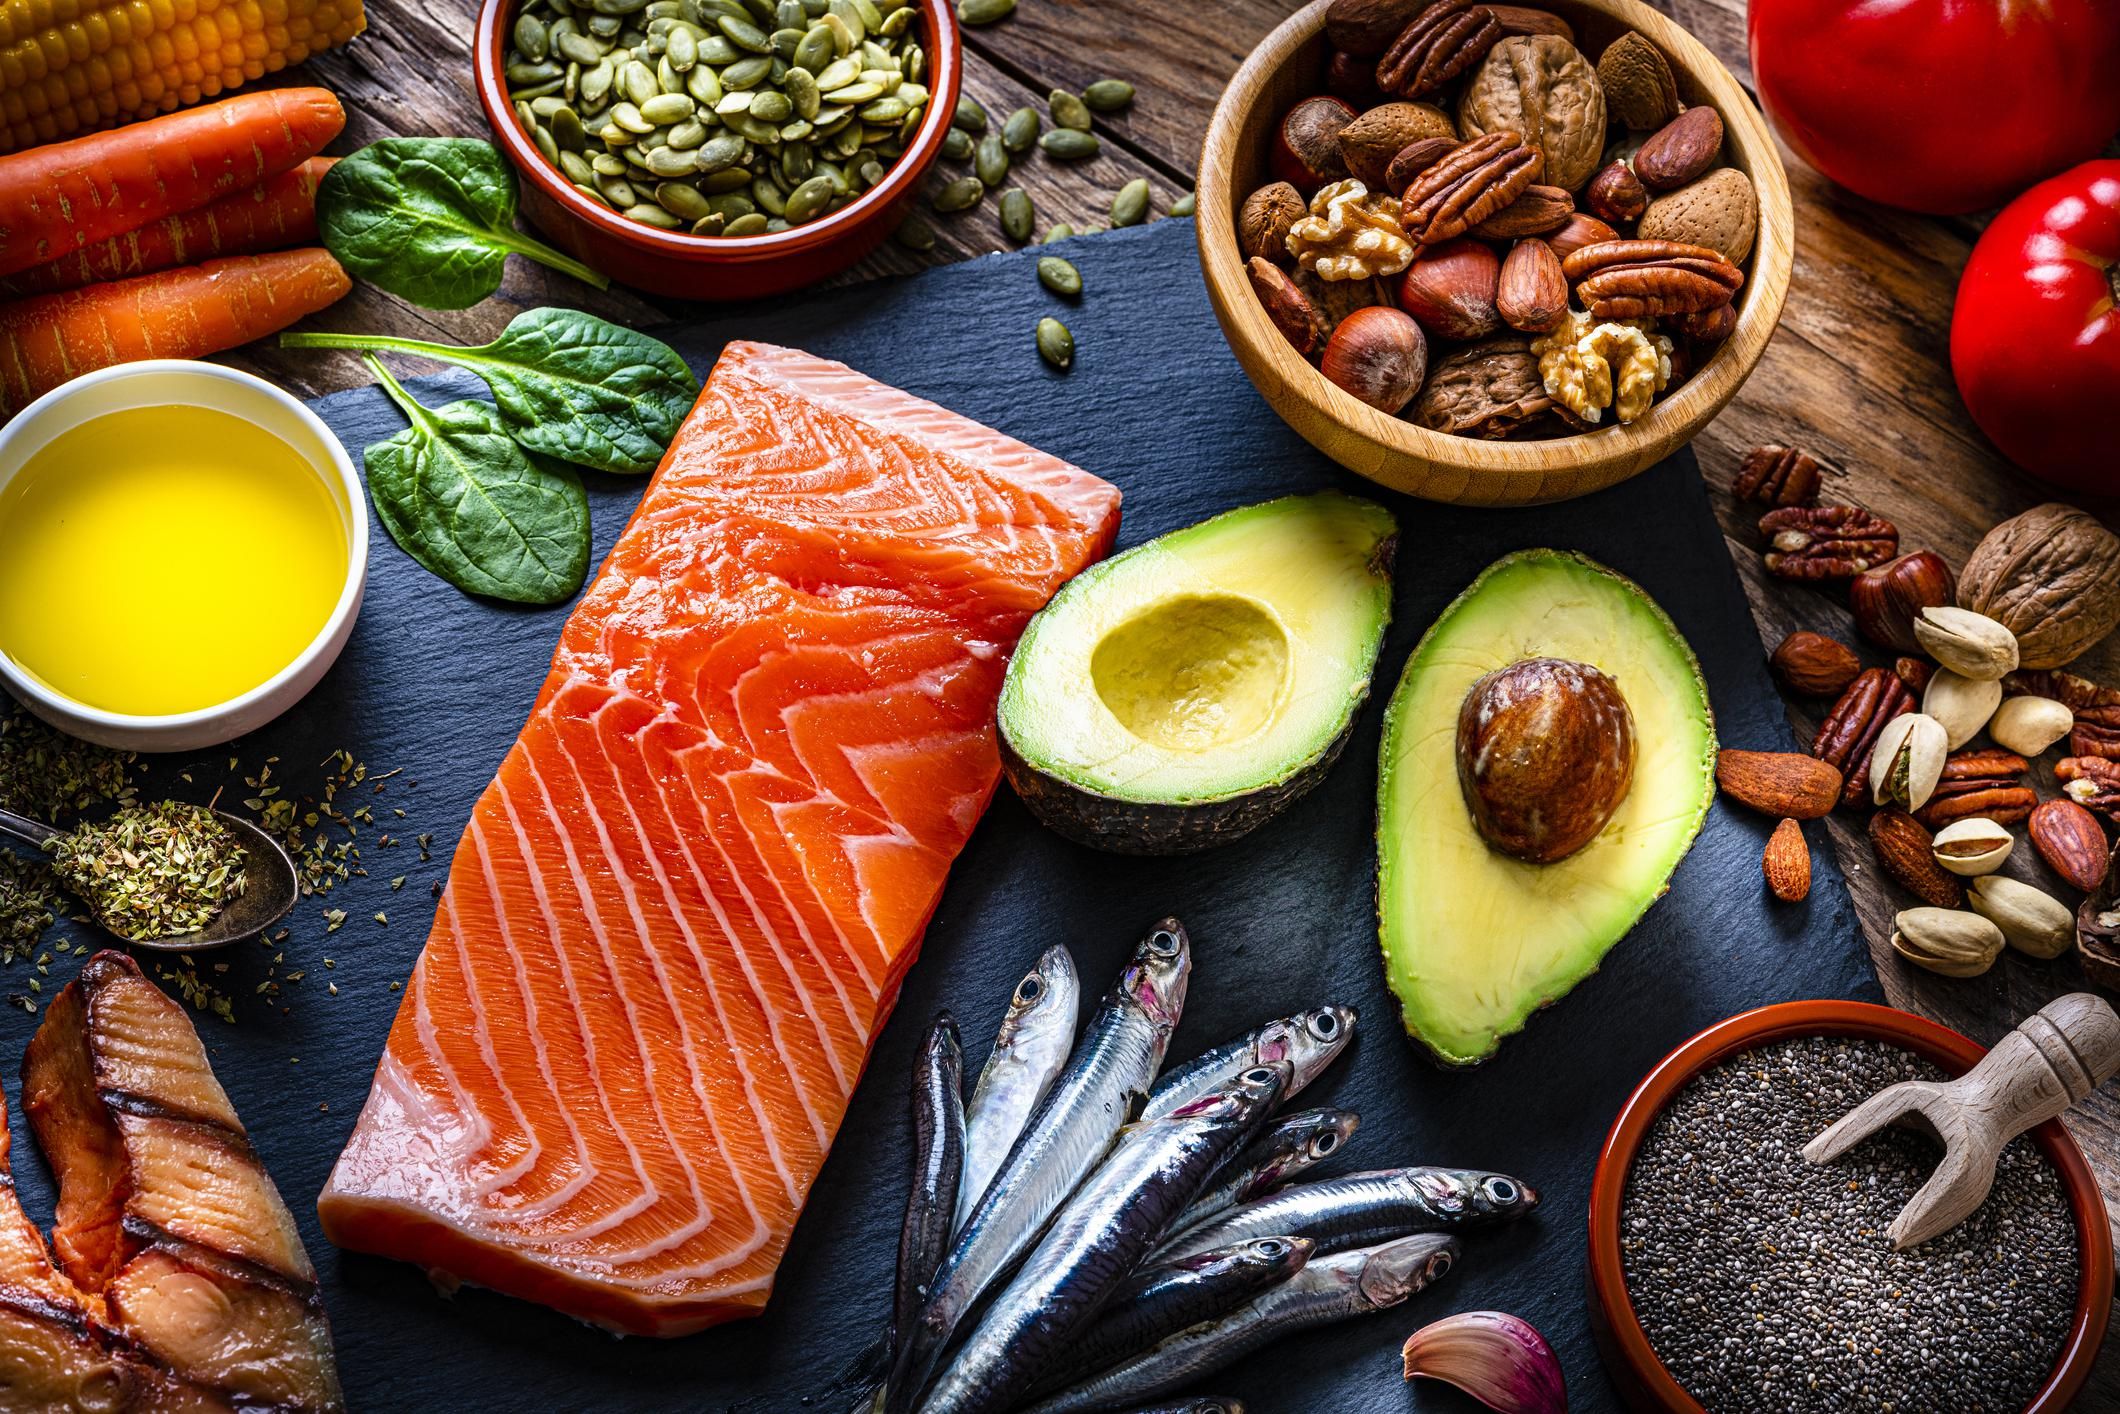 Food with high content of Omega-3 fats